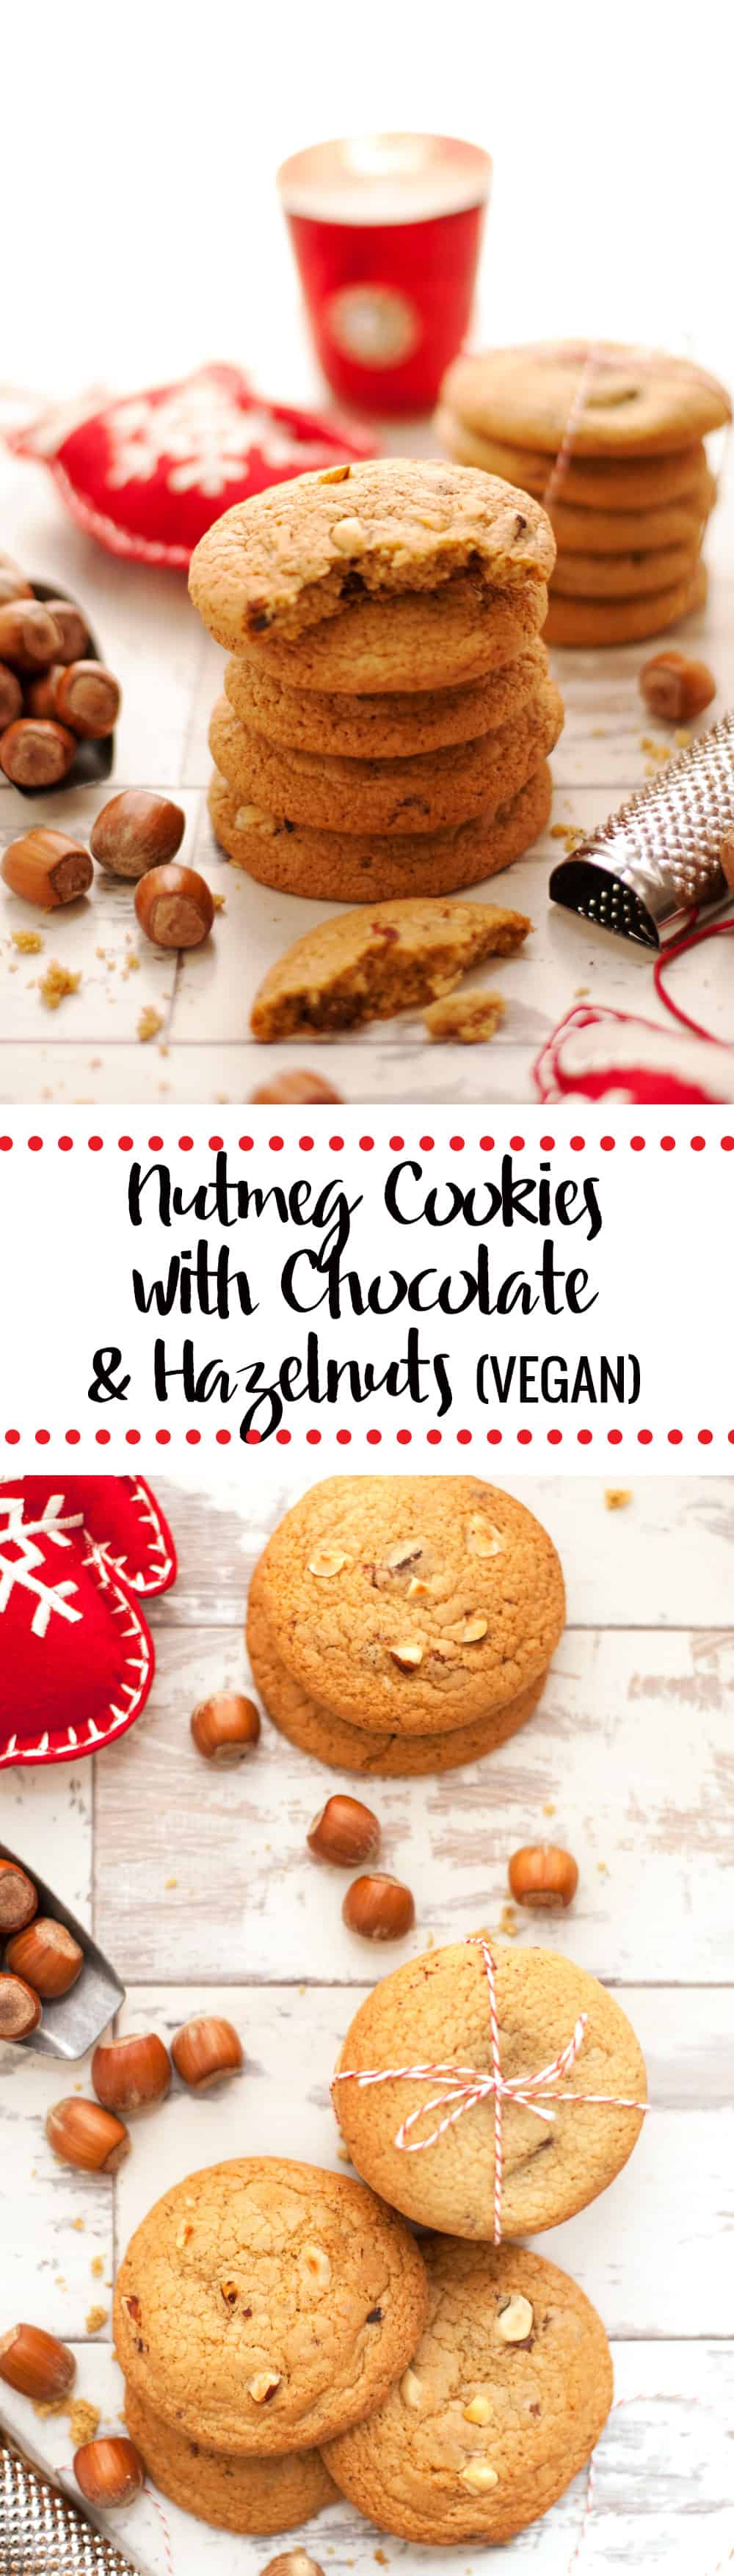 Nutmeg Cookies with Chocolate and Hazelnut. Perfect Christmas Cookie, crisp on the outside, soft and chewy inside | via @annabanana.co